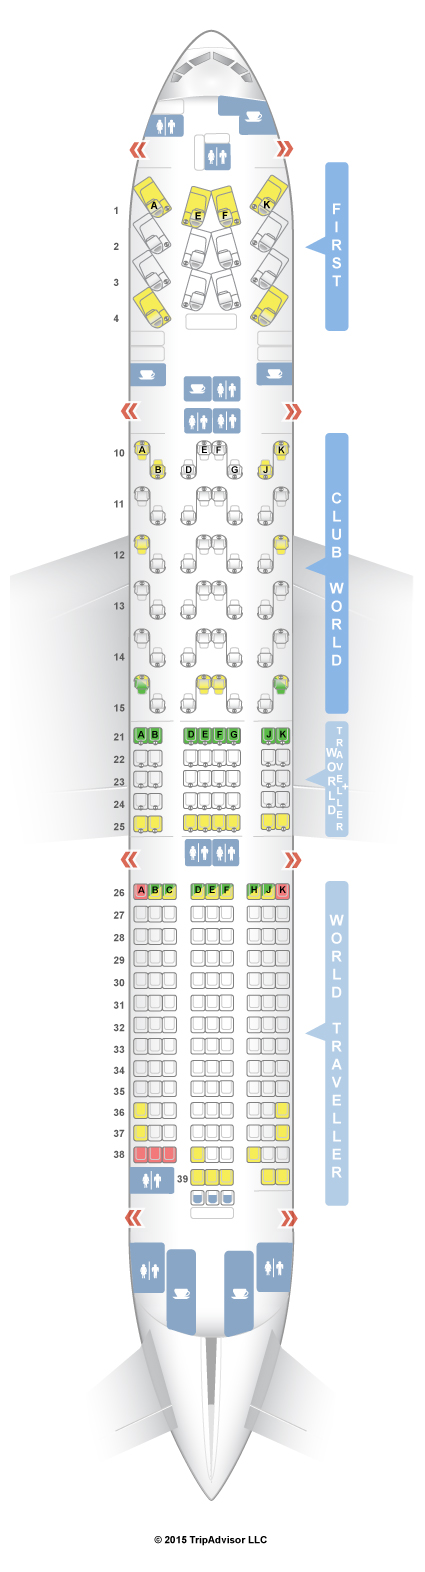 Boeing 77w Seating Chart